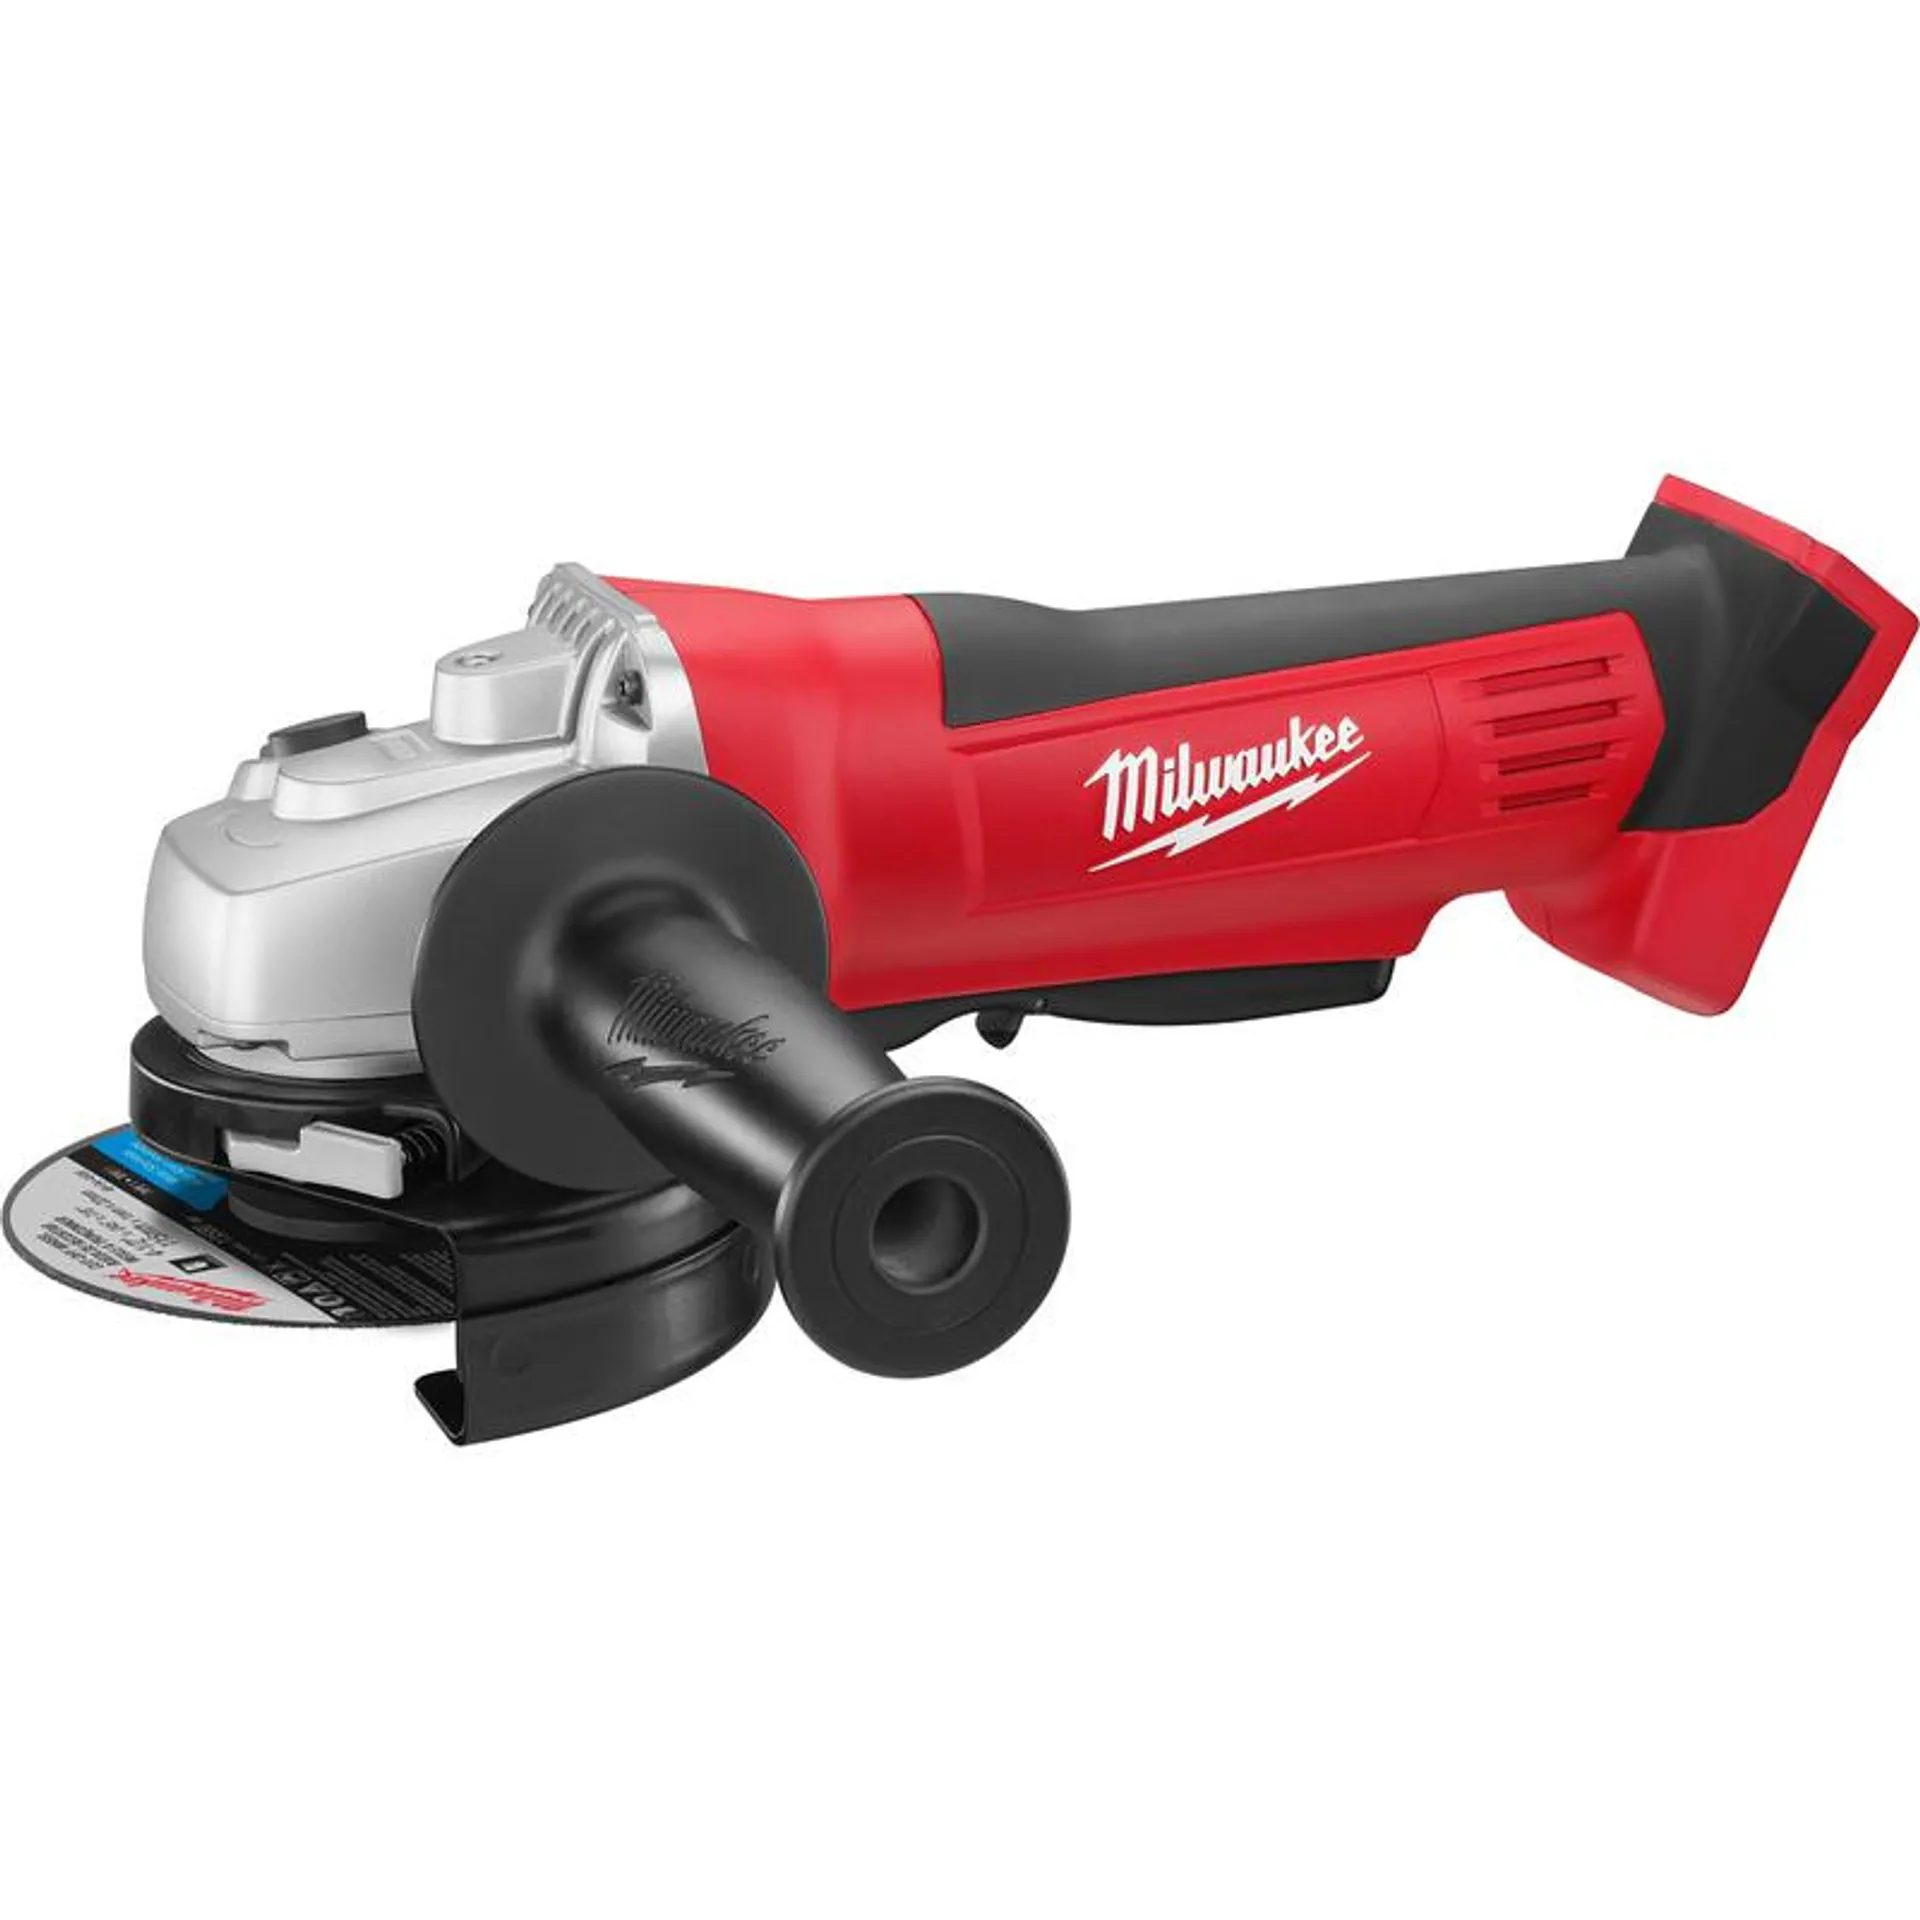 Milwaukee HD18AG-0 Angle Grinder Body Only